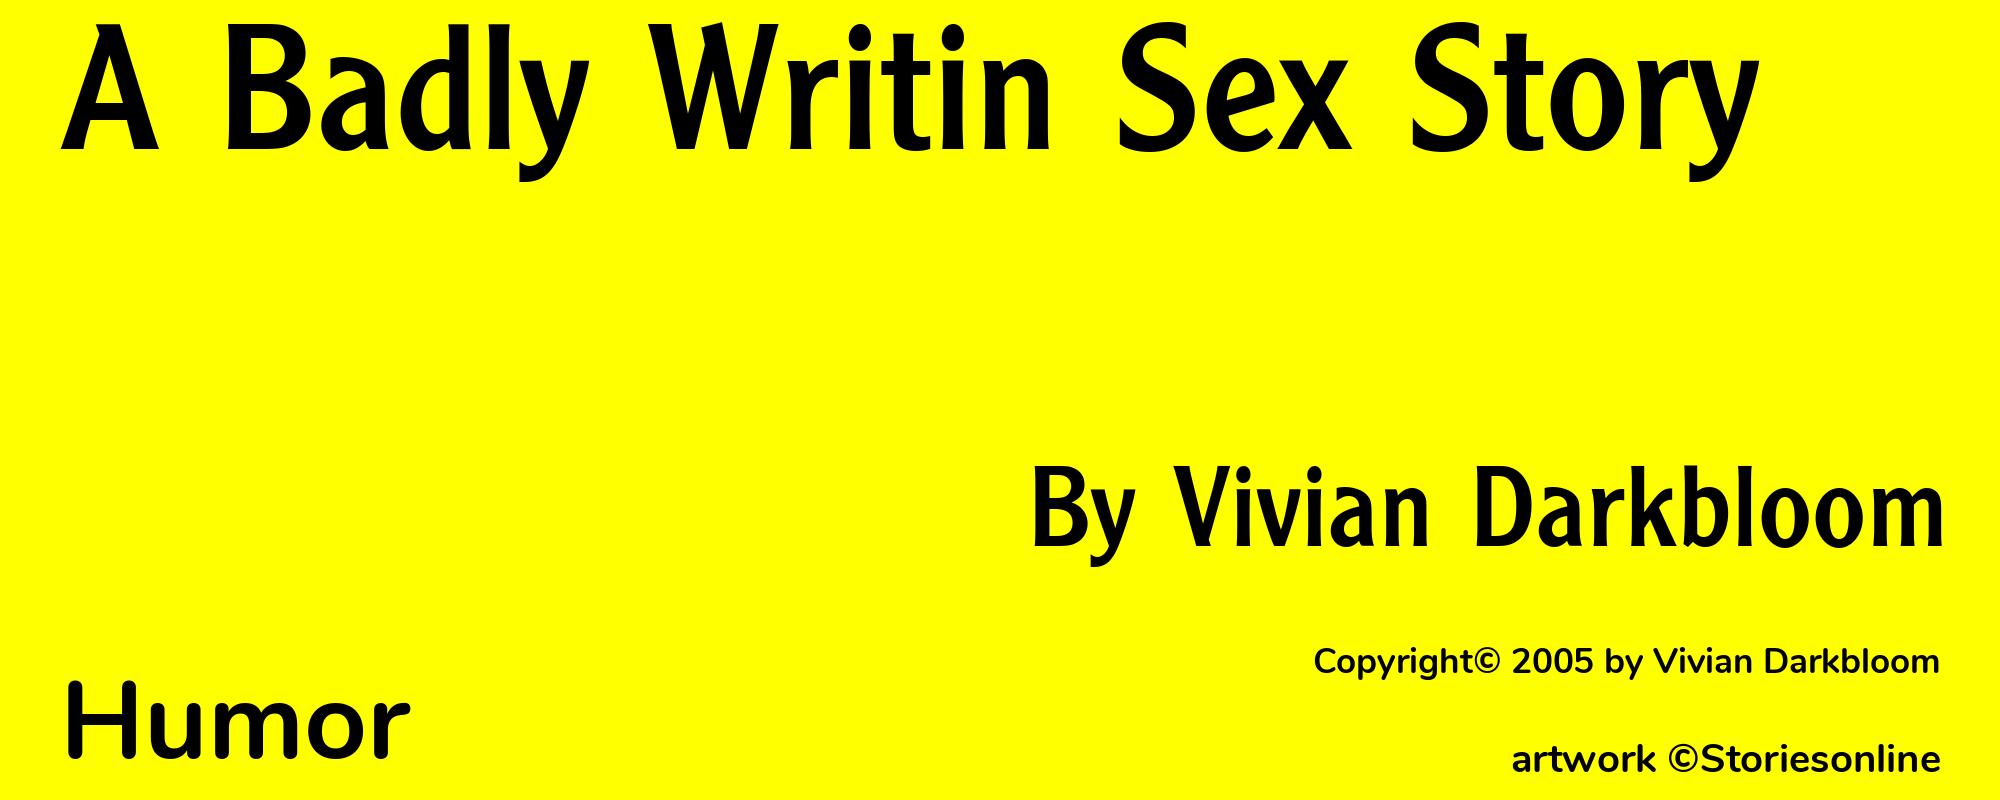 A Badly Writin Sex Story - Cover